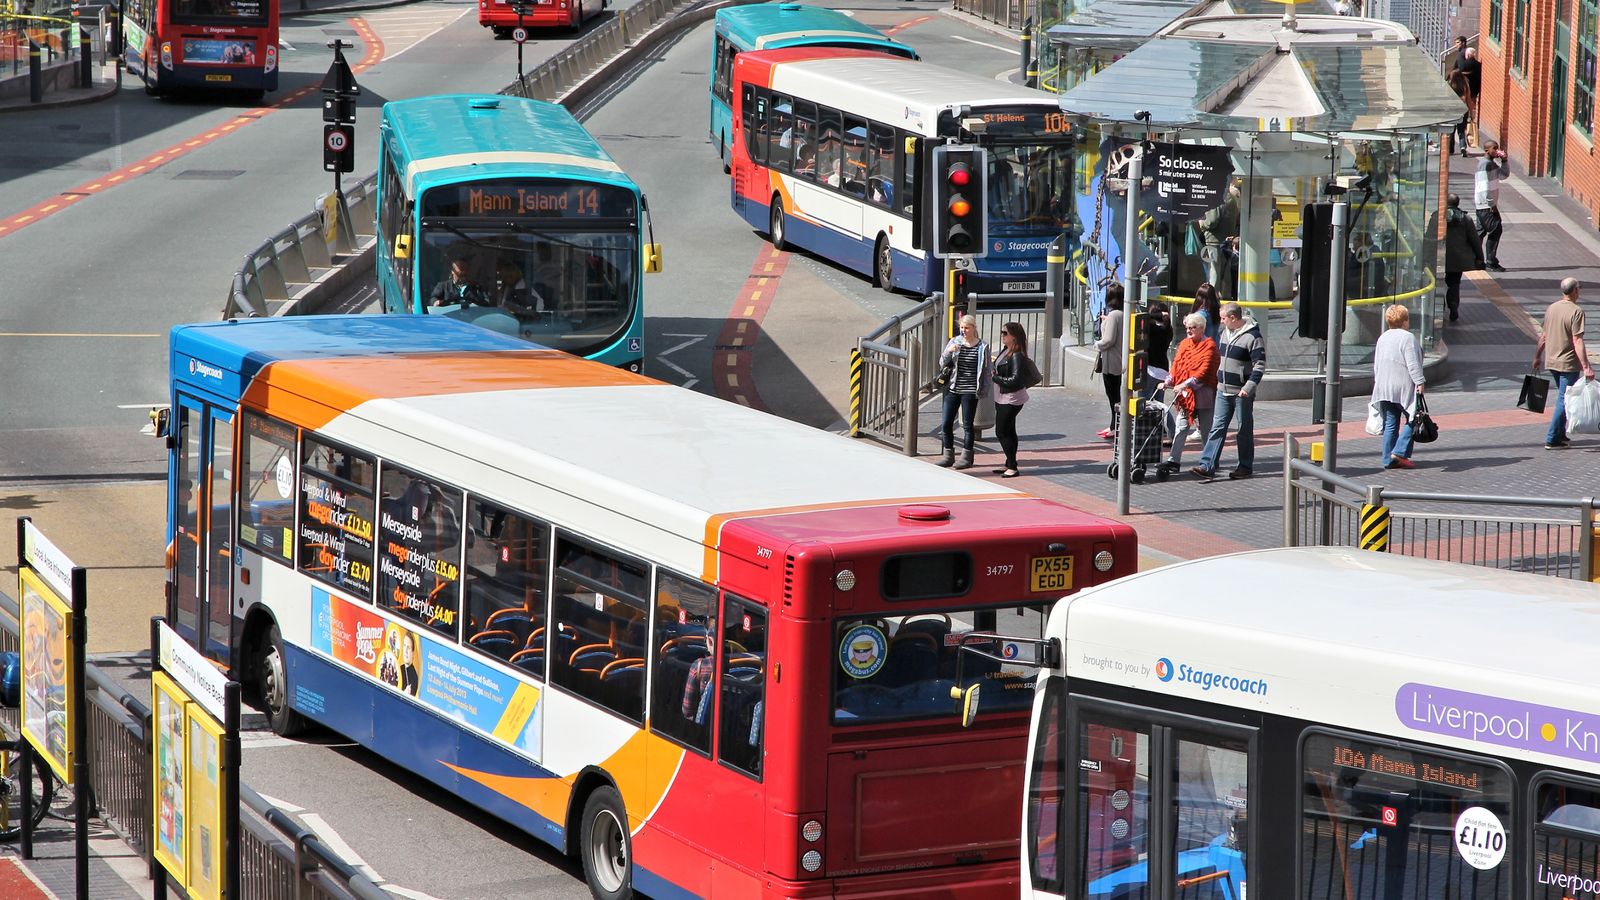 Cost of living crisis: Bus fares in England to be capped at £2 between January and March